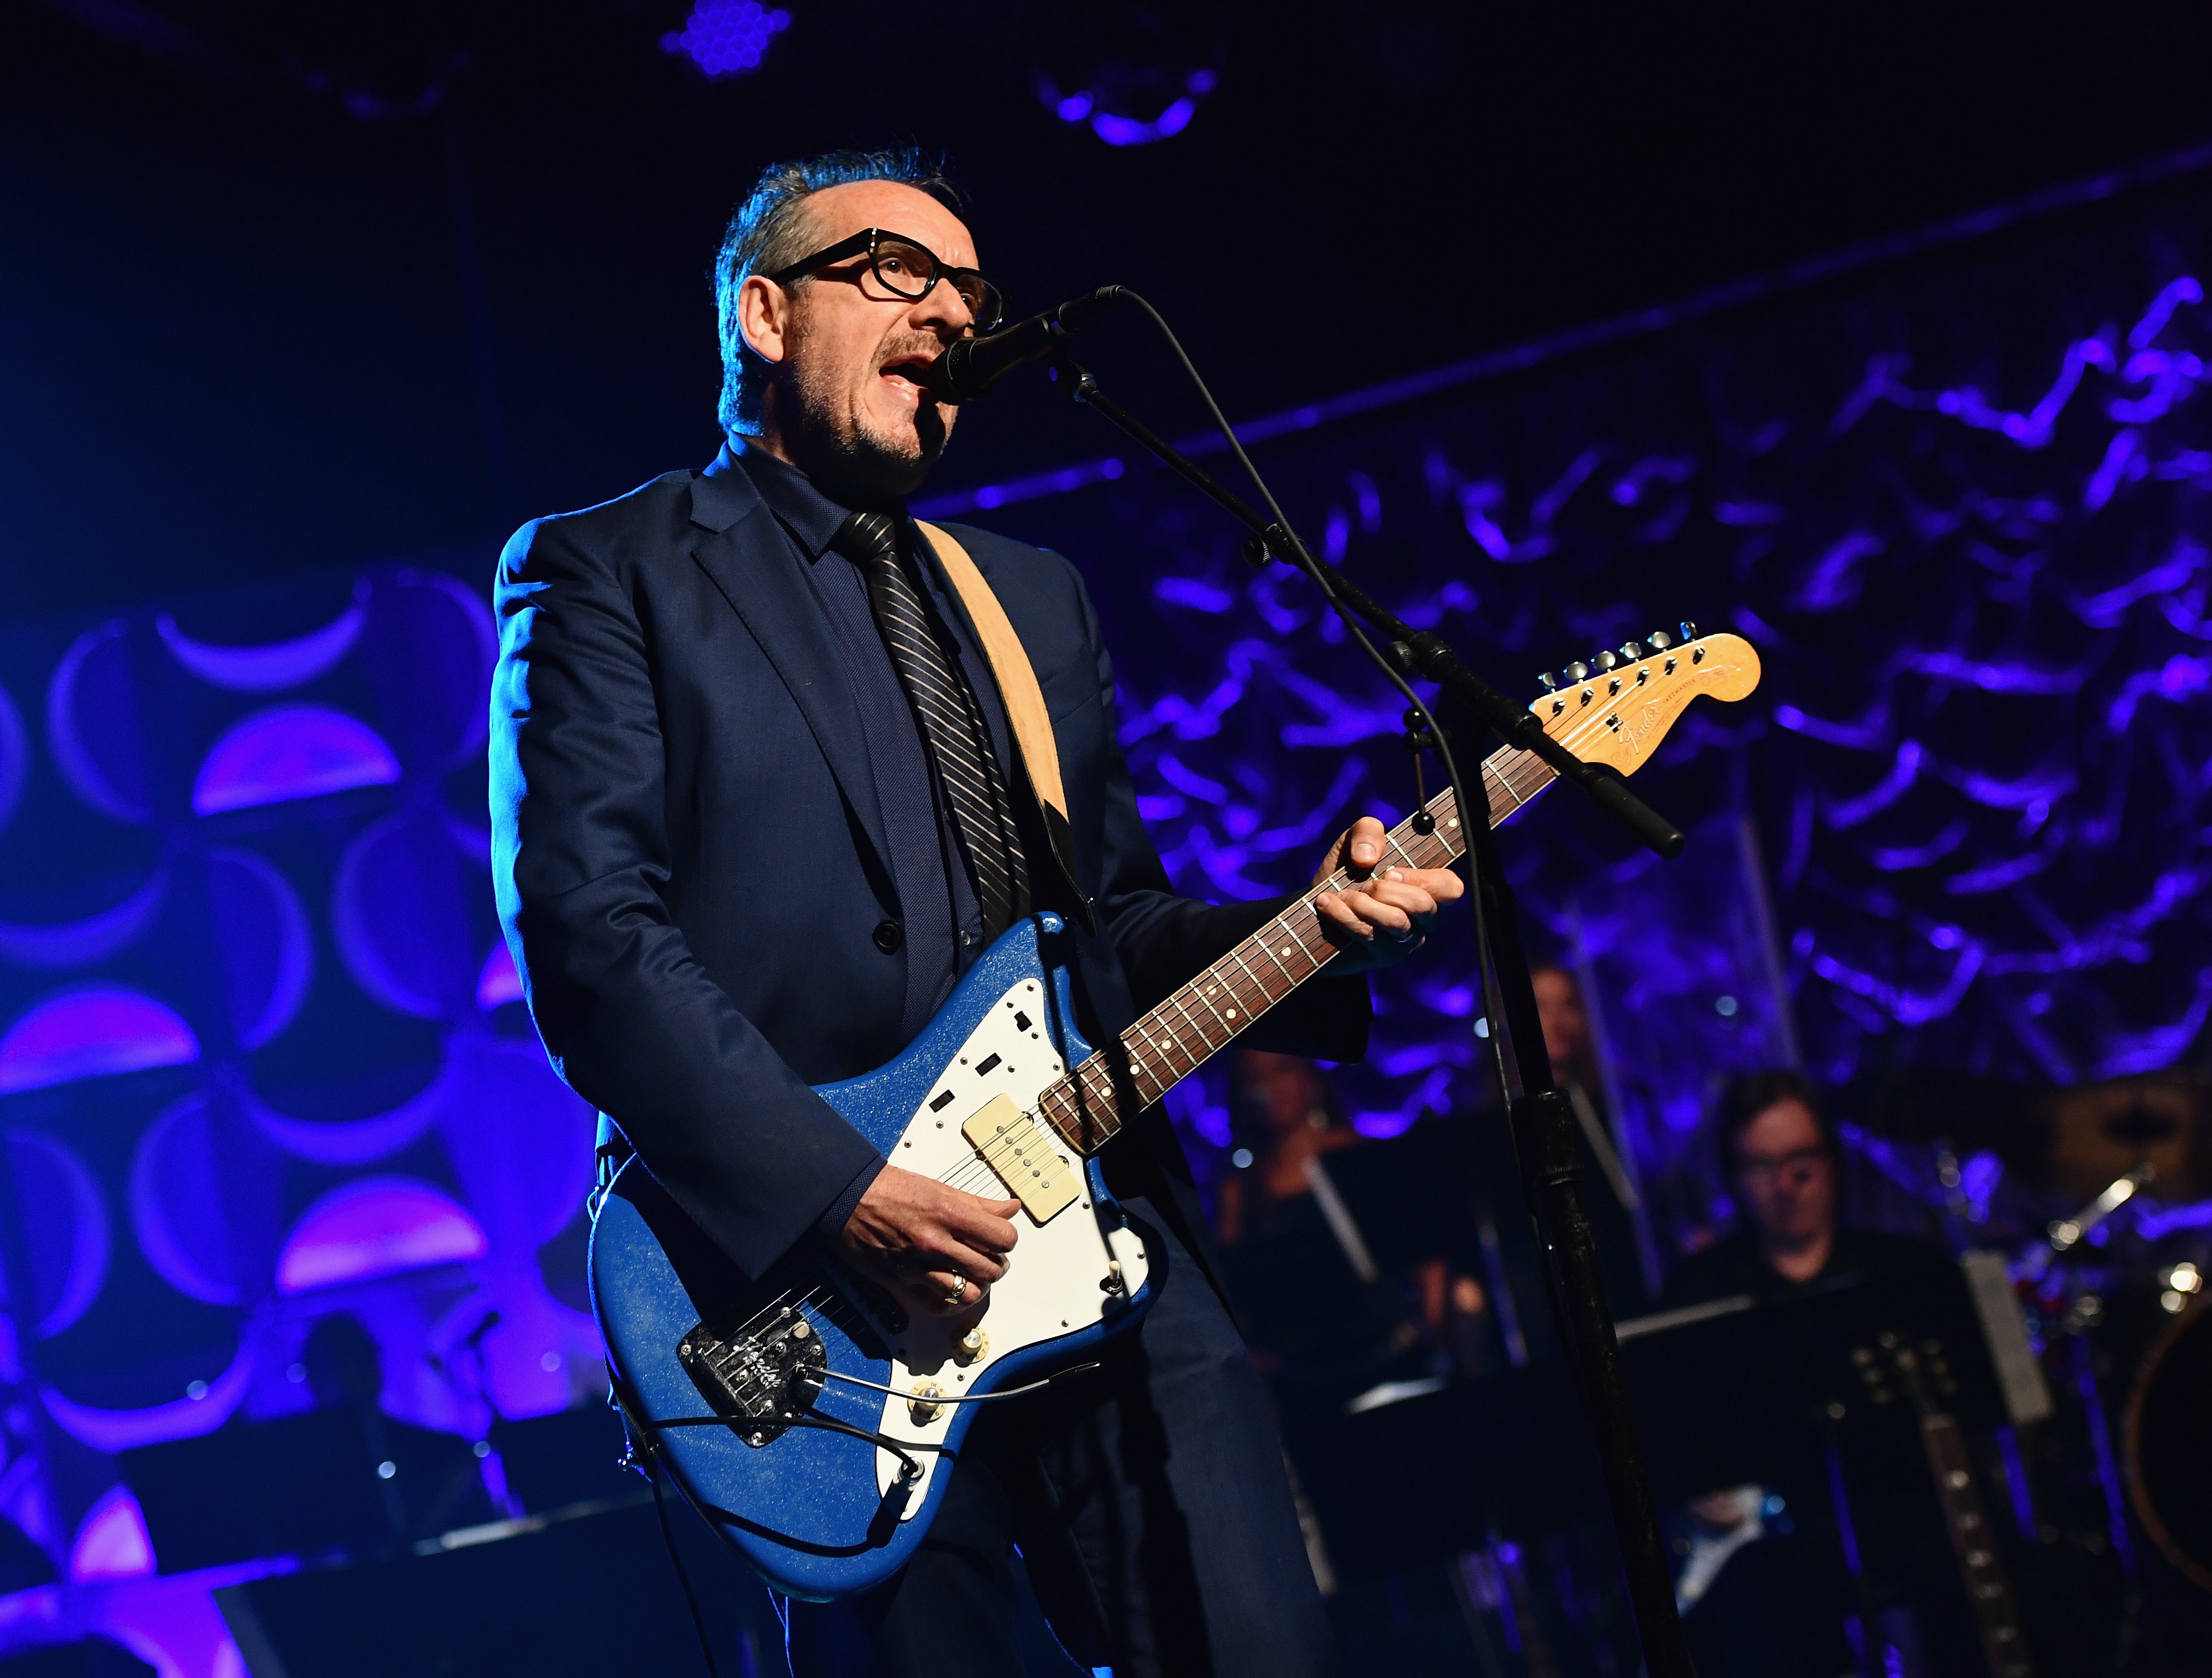 Costello performs onstage during the 2016 Songwriters Hall Of Fame Annual Induction And Awards, in New York